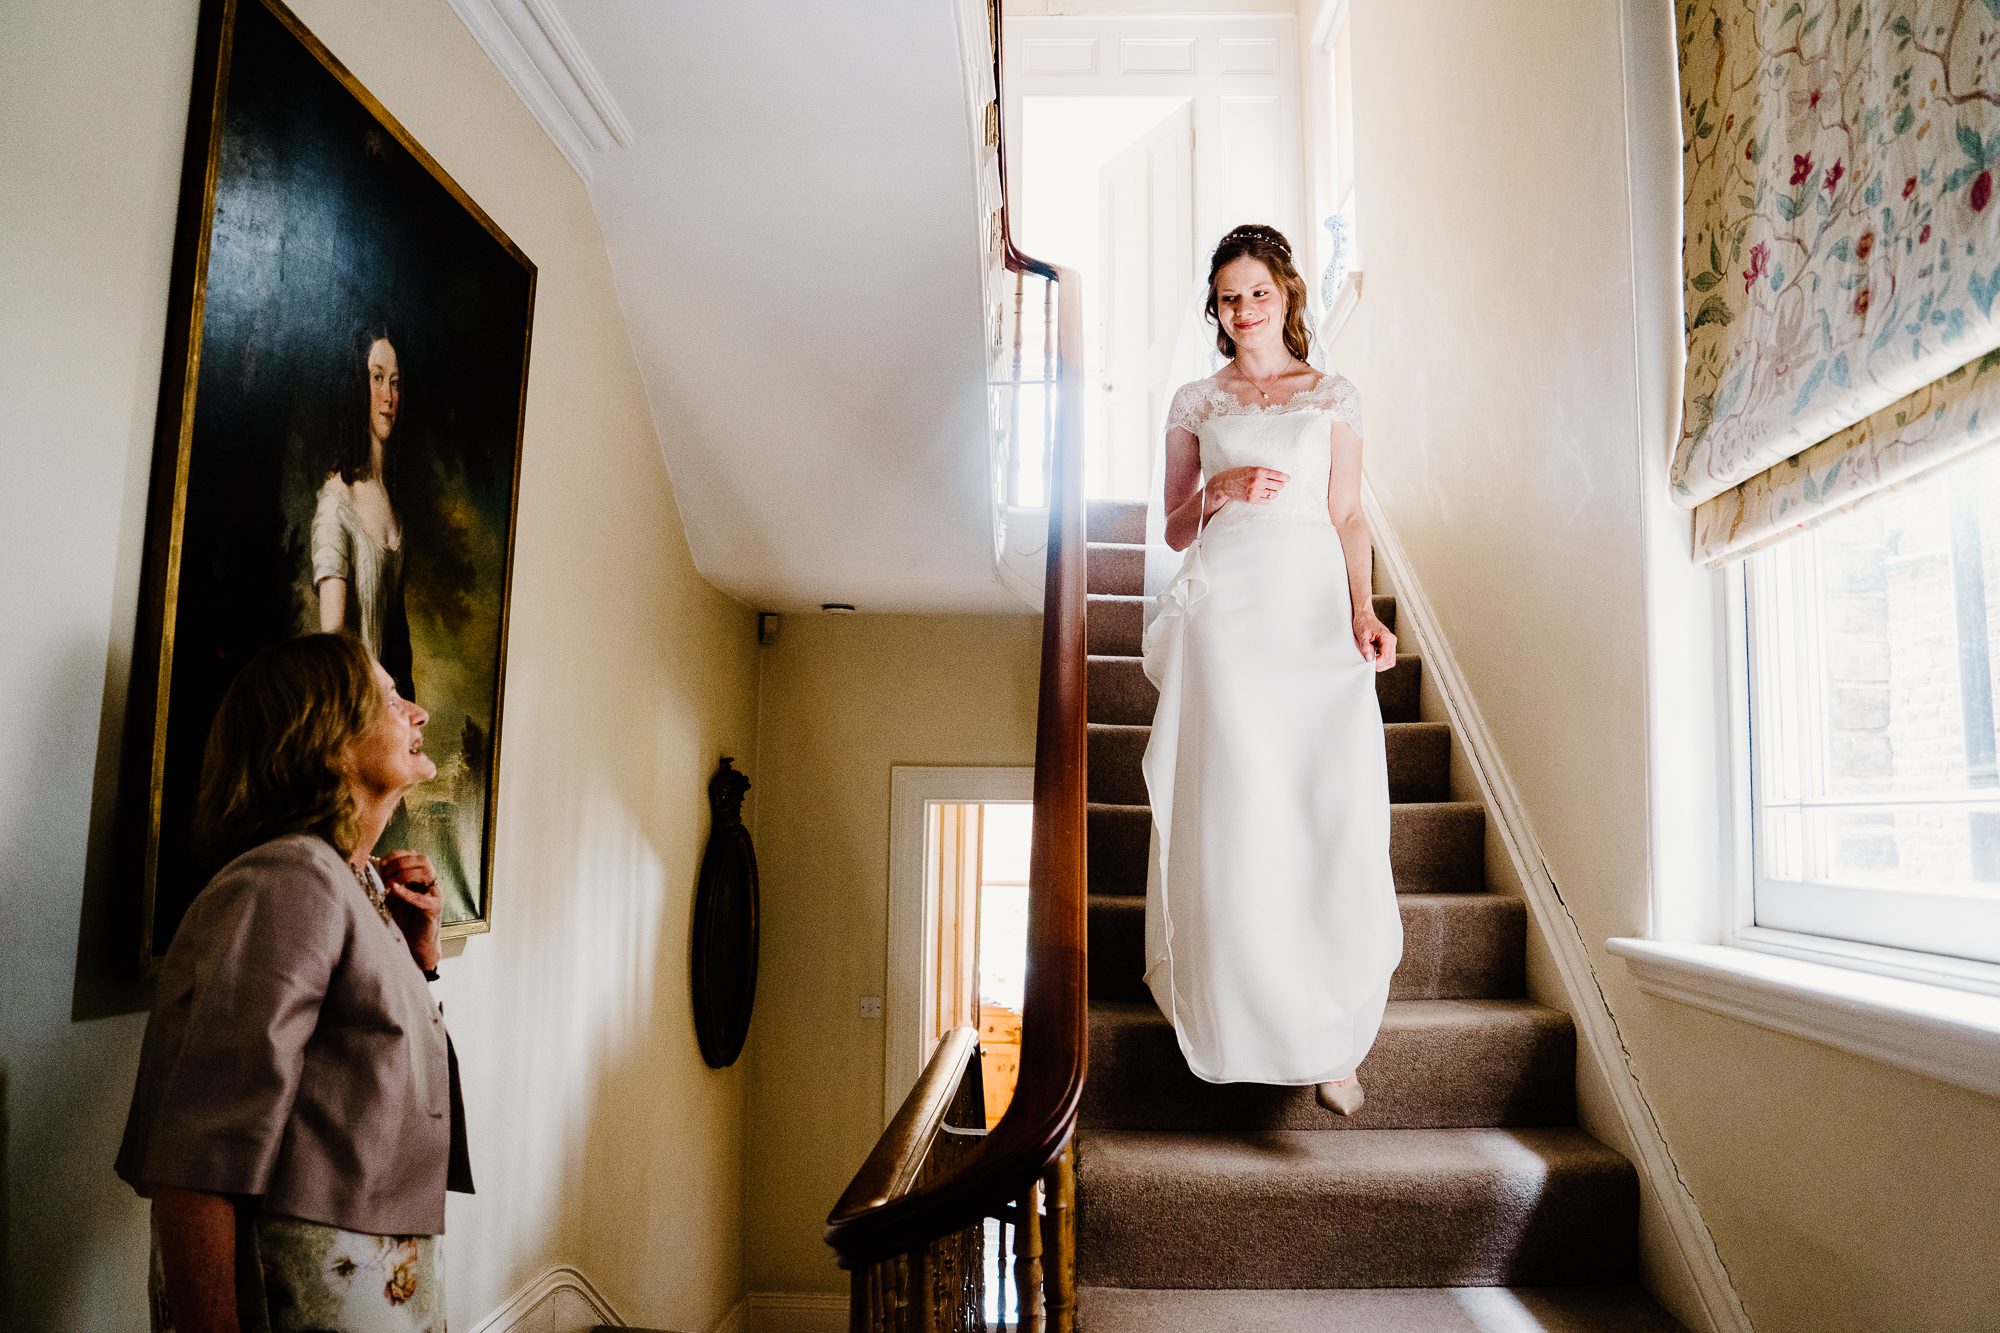 Mother of the bride sees her daughter in her wedding dress. Classic wedding photography moments.